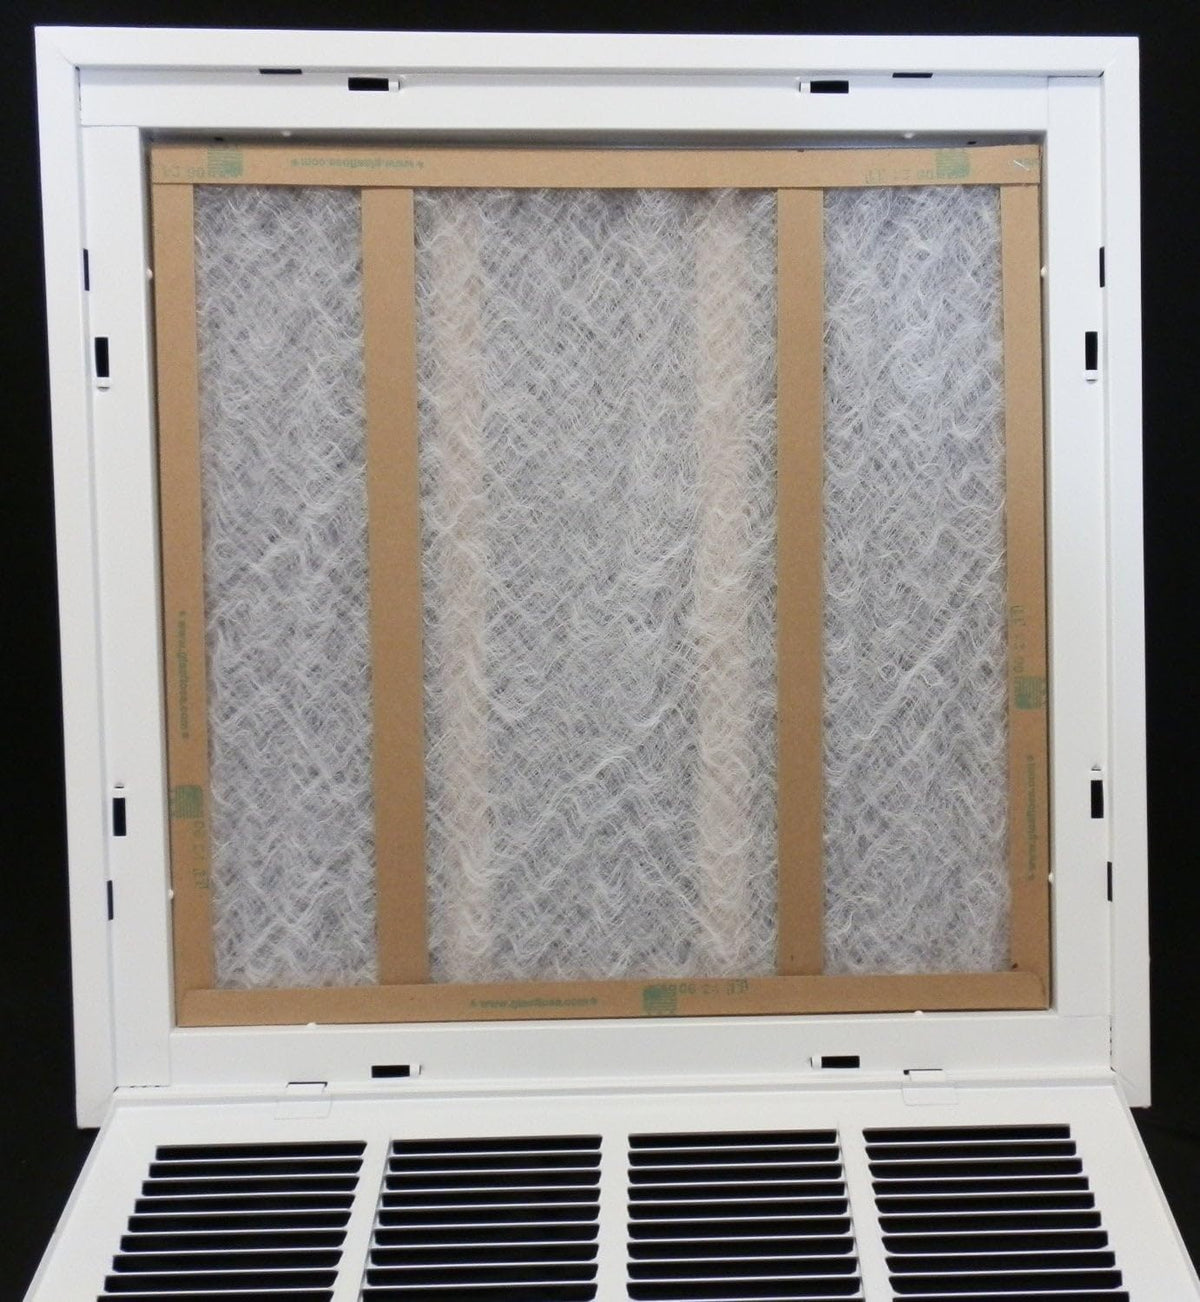 22&quot; X 6&quot; Steel Return Air Filter Grille for 1&quot; Filter - Removable Frame - [Outer Dimensions: 24 5/8&quot; X 8 5/8&quot;]